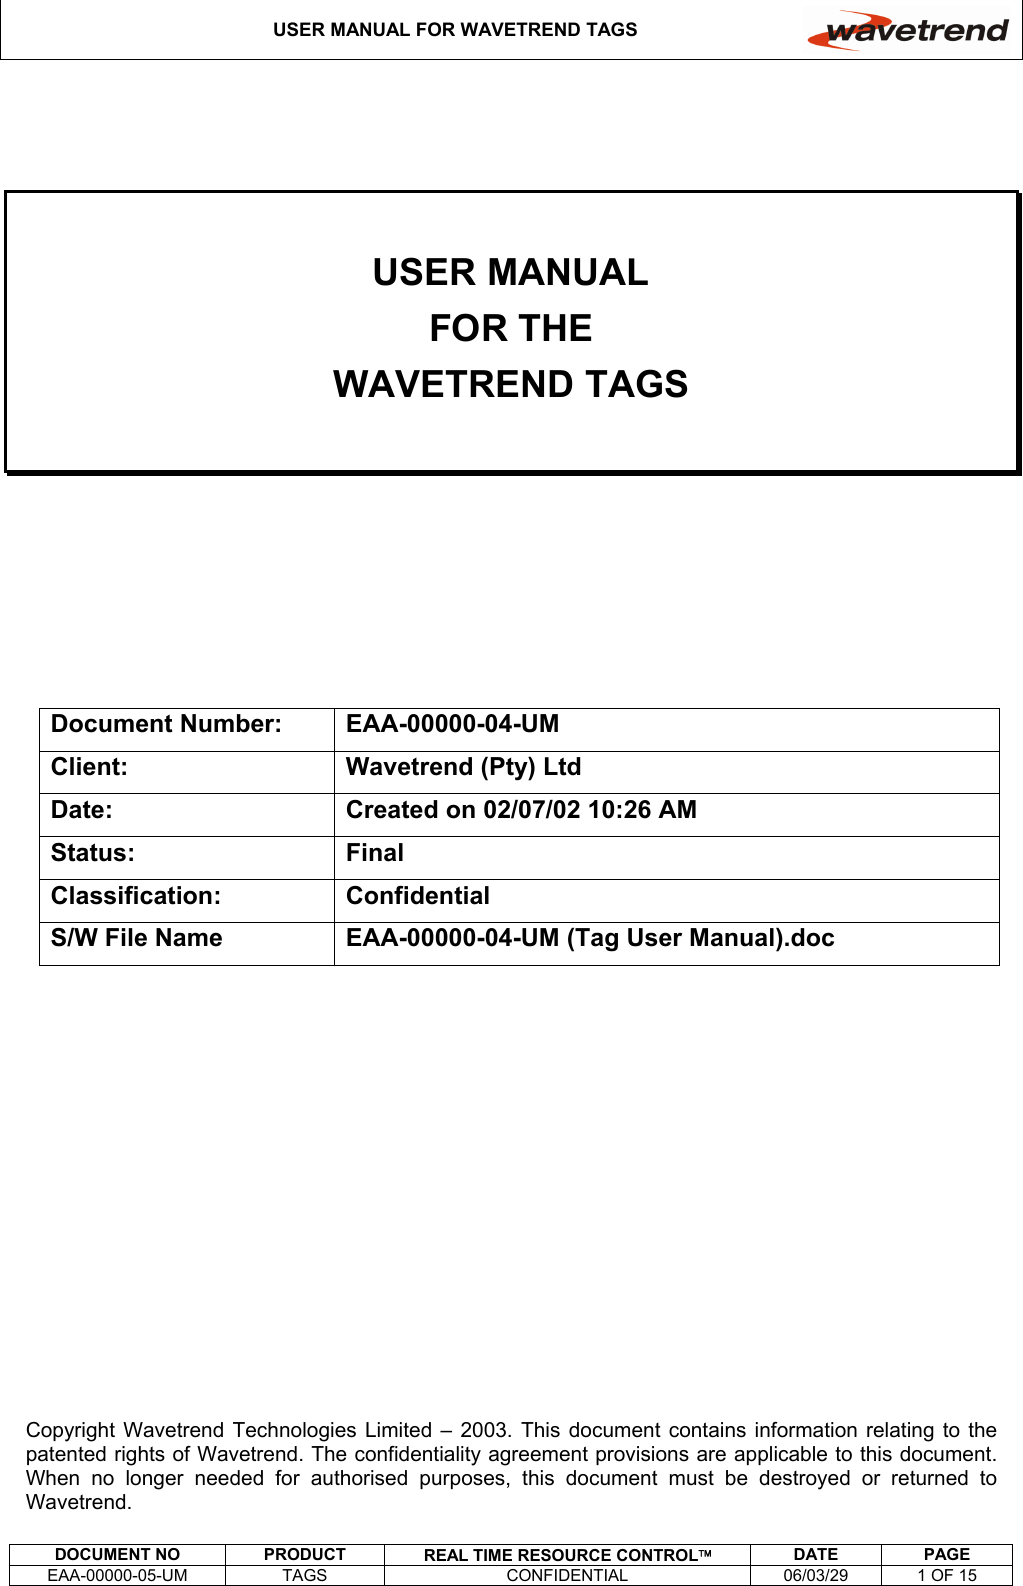 USER MANUAL FOR WAVETREND TAGS     DOCUMENT NO  PRODUCT  REAL TIME RESOURCE CONTROL DATE PAGE EAA-00000-05-UM  TAGS  CONFIDENTIAL  06/03/29  1 OF 15    USER MANUAL FOR THE WAVETREND TAGS       Document Number:  EAA-00000-04-UM Client:  Wavetrend (Pty) Ltd Date:  Created on 02/07/02 10:26 AM Status: Final Classification: Confidential S/W File Name  EAA-00000-04-UM (Tag User Manual).doc              Copyright Wavetrend Technologies Limited – 2003. This document contains information relating to the patented rights of Wavetrend. The confidentiality agreement provisions are applicable to this document.  When no longer needed for authorised purposes, this document must be destroyed or returned to Wavetrend. 